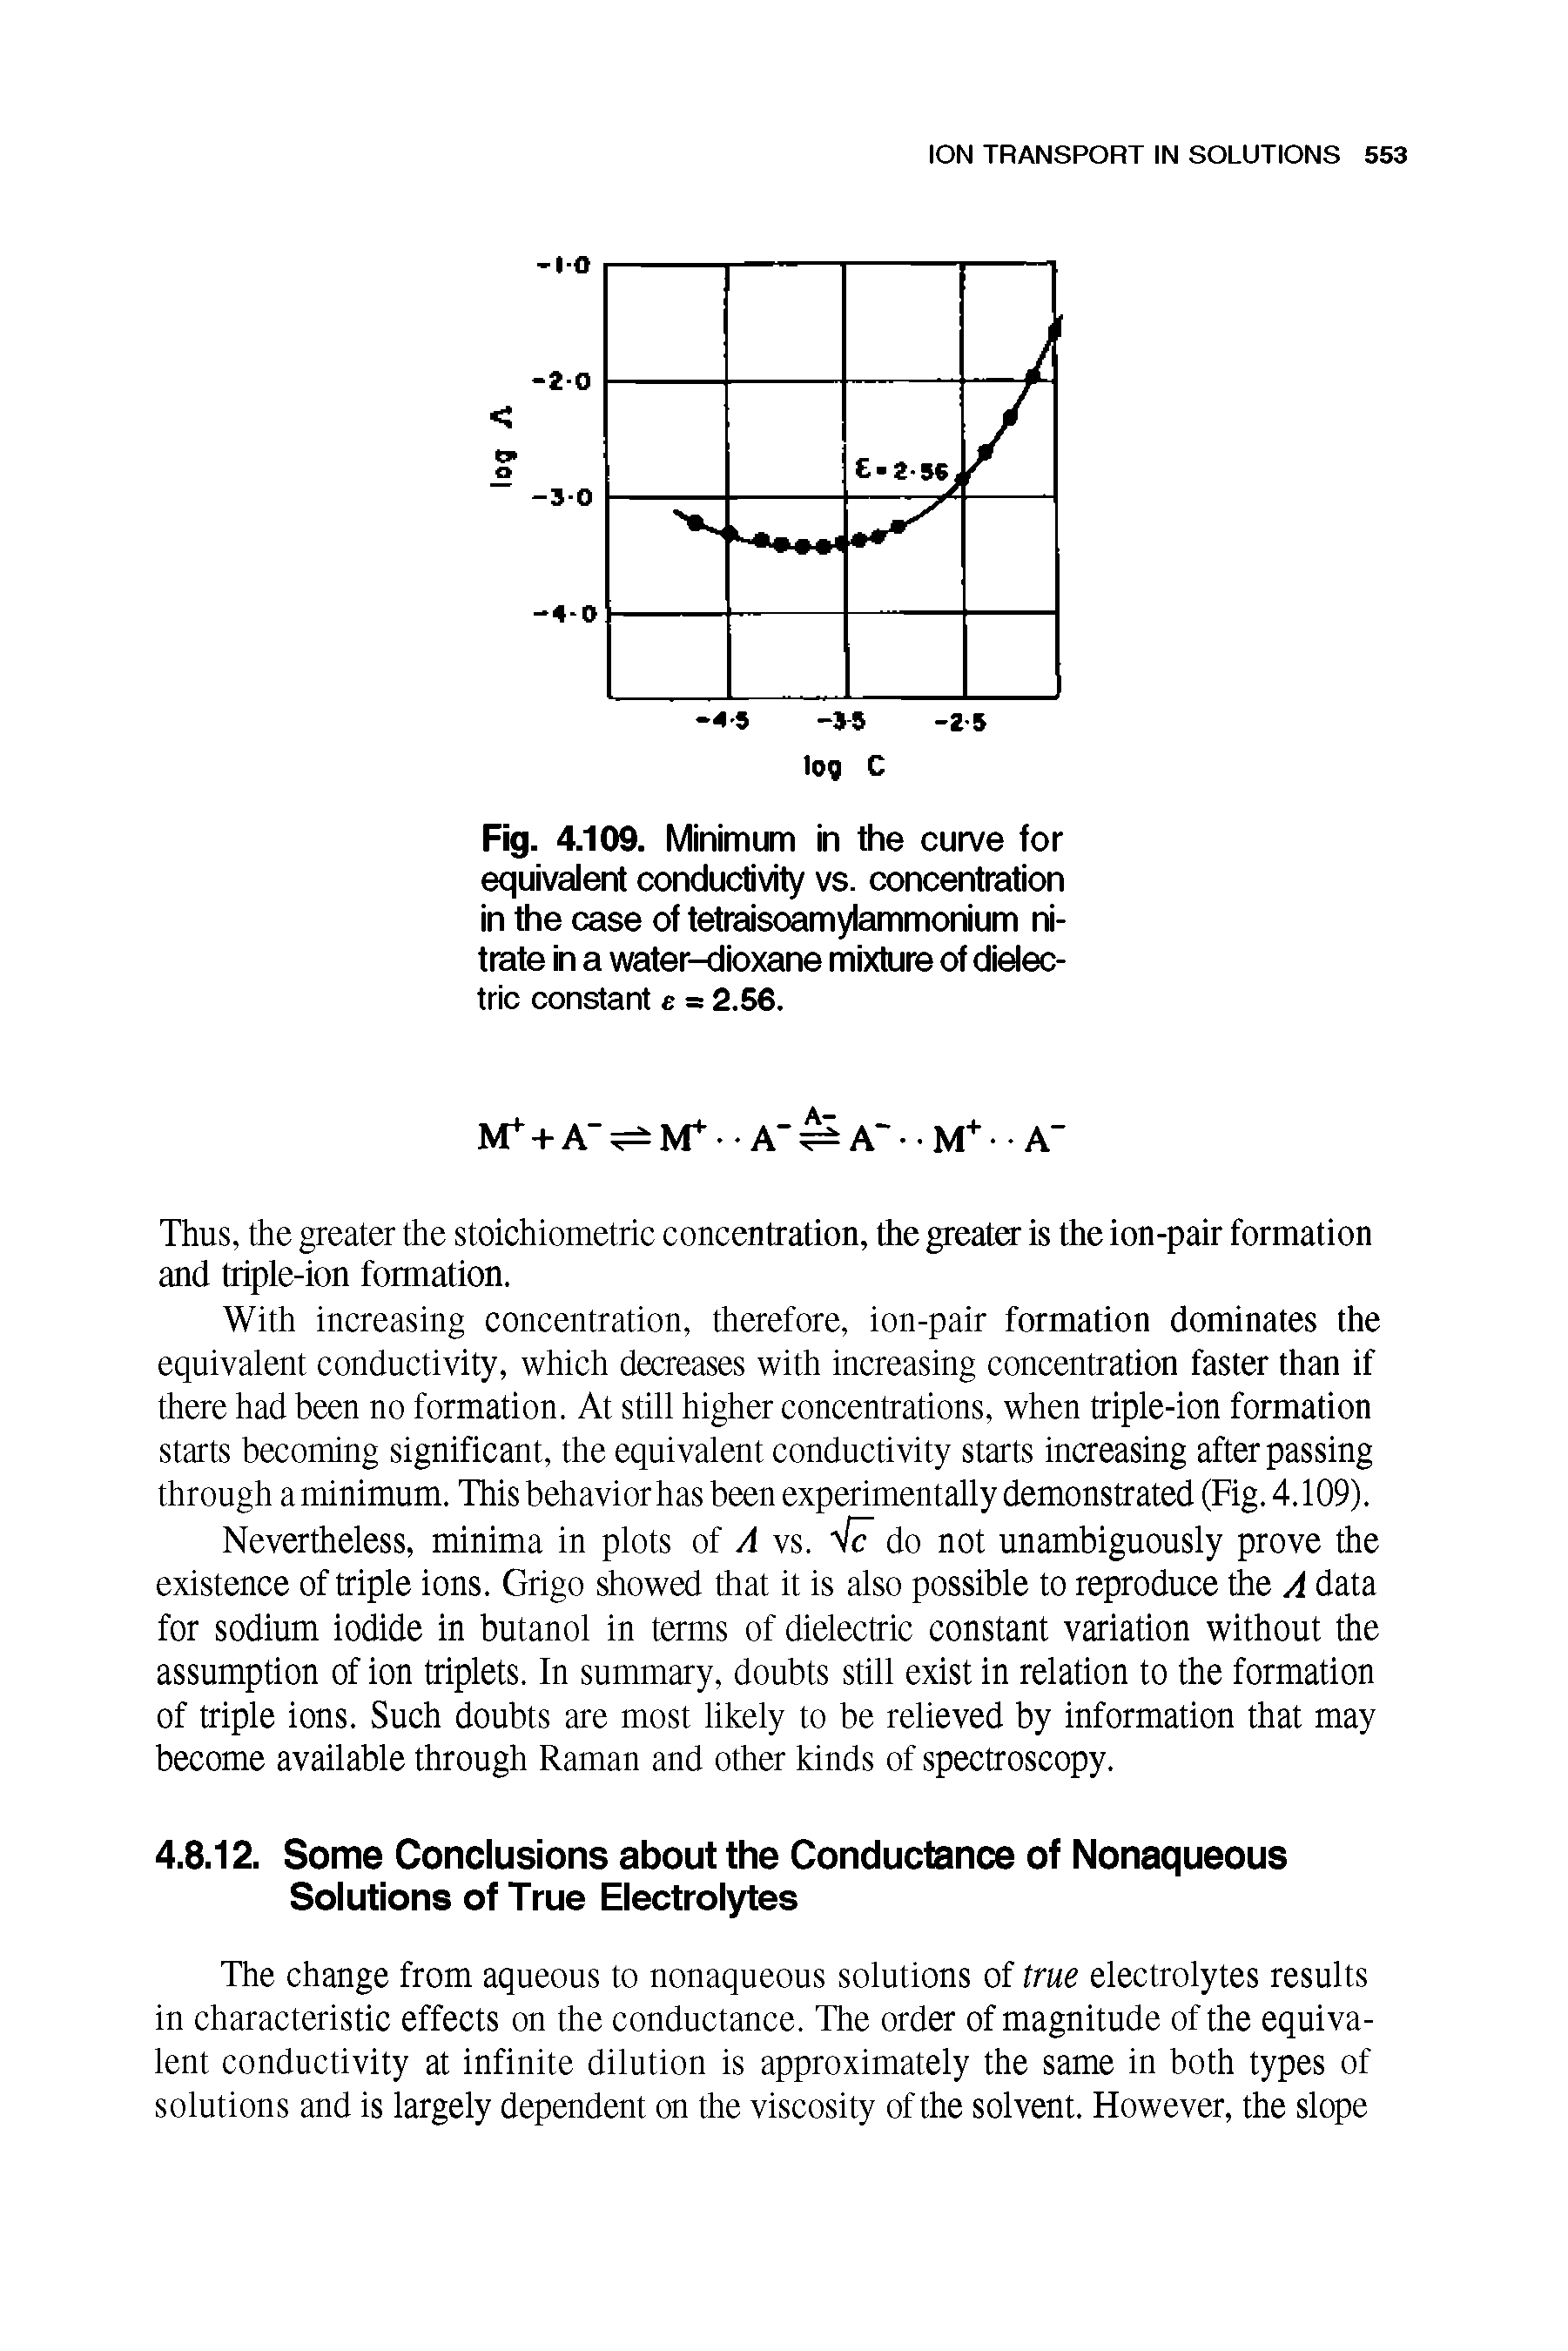 Fig. 4.109. Minimum in the curve for equivalent conductivity vs. concentration in the case of tetraisoamylammonium nitrate in a water-dioxane mixture of dielectric constant e = 2.56.